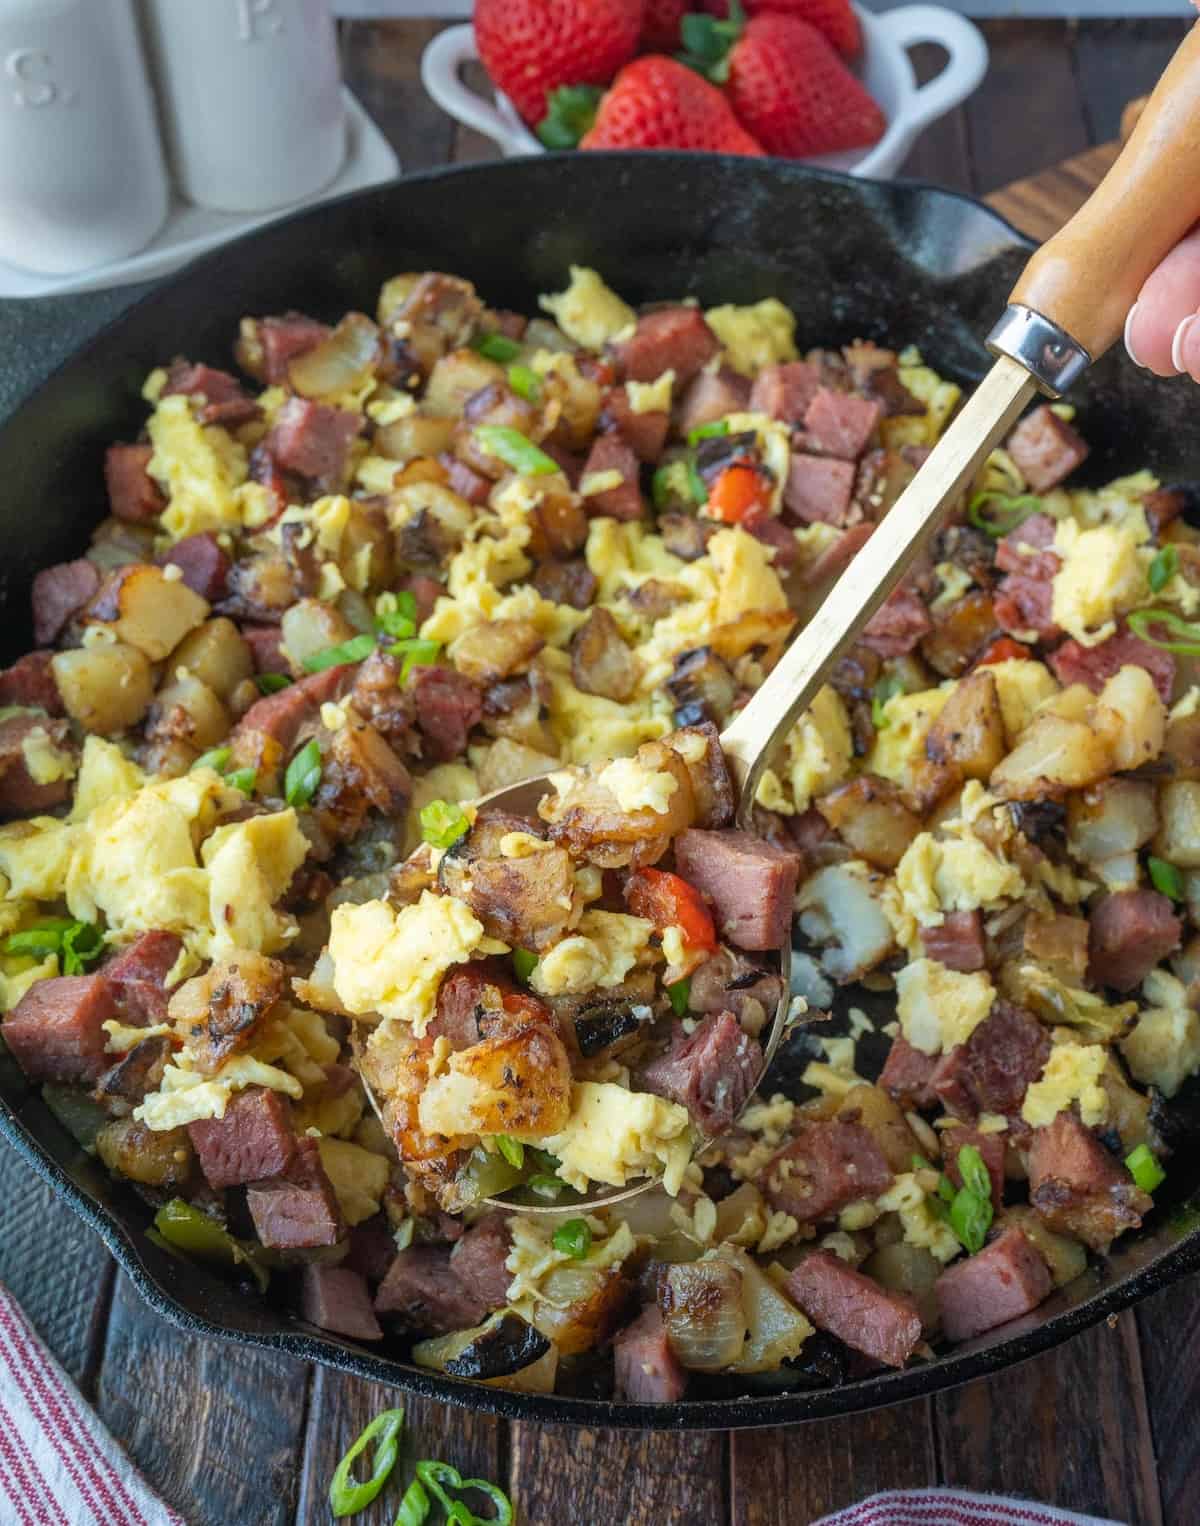 A spoon scooping up some breakfast hash.